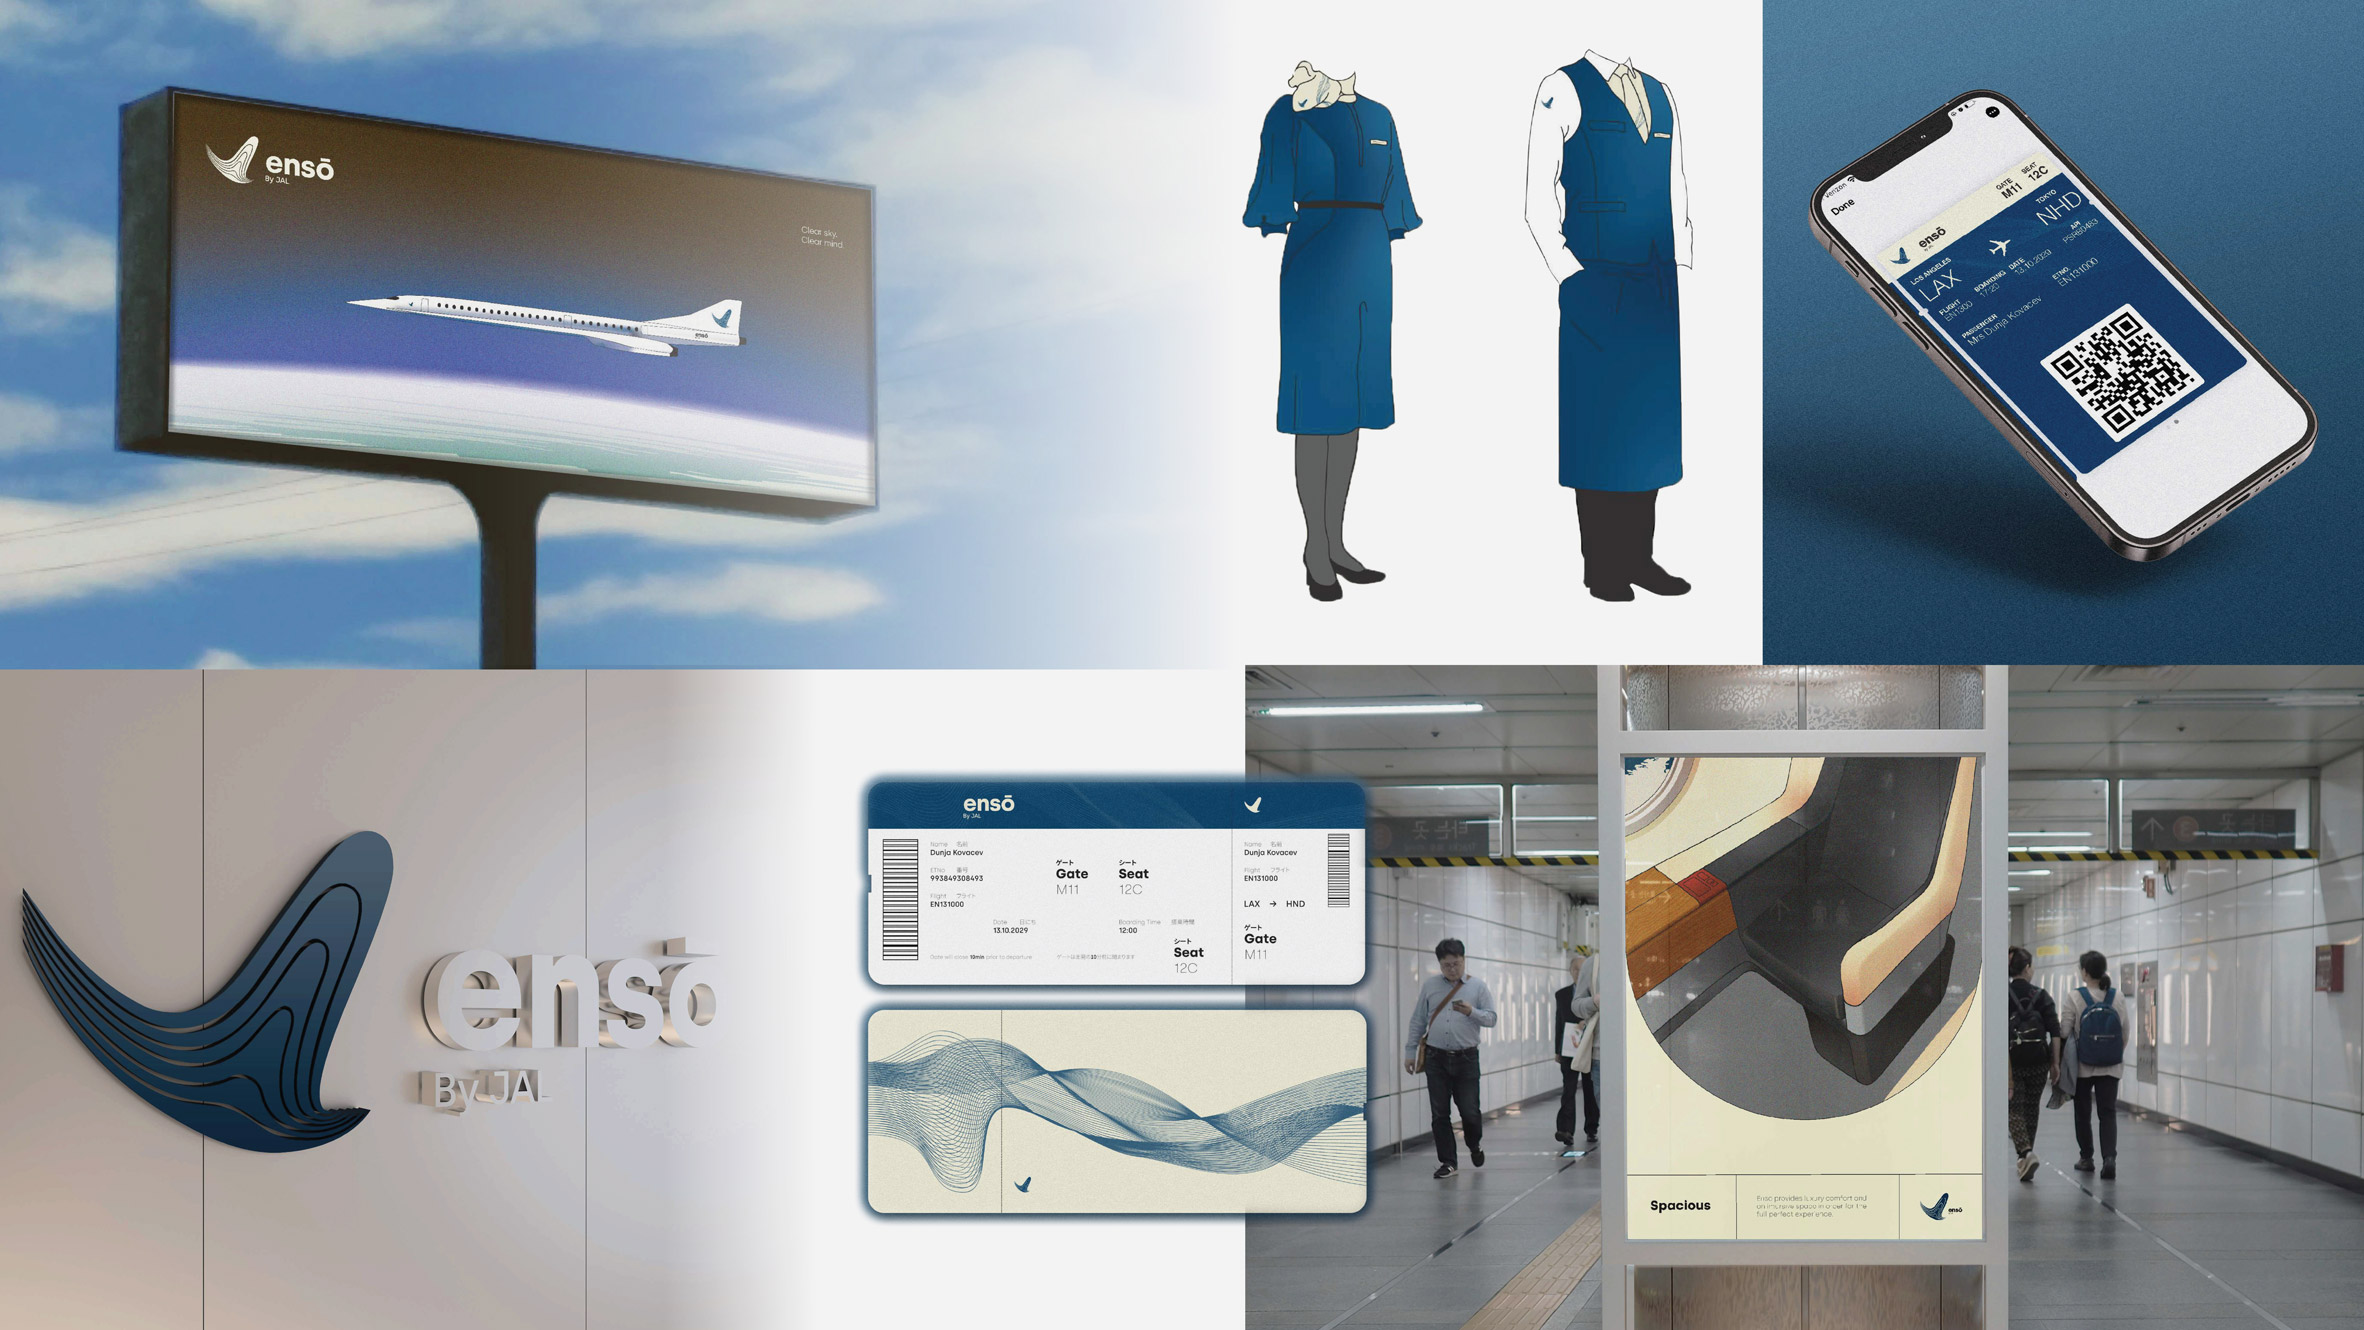 Collage showing a graphic rebrand of an airline